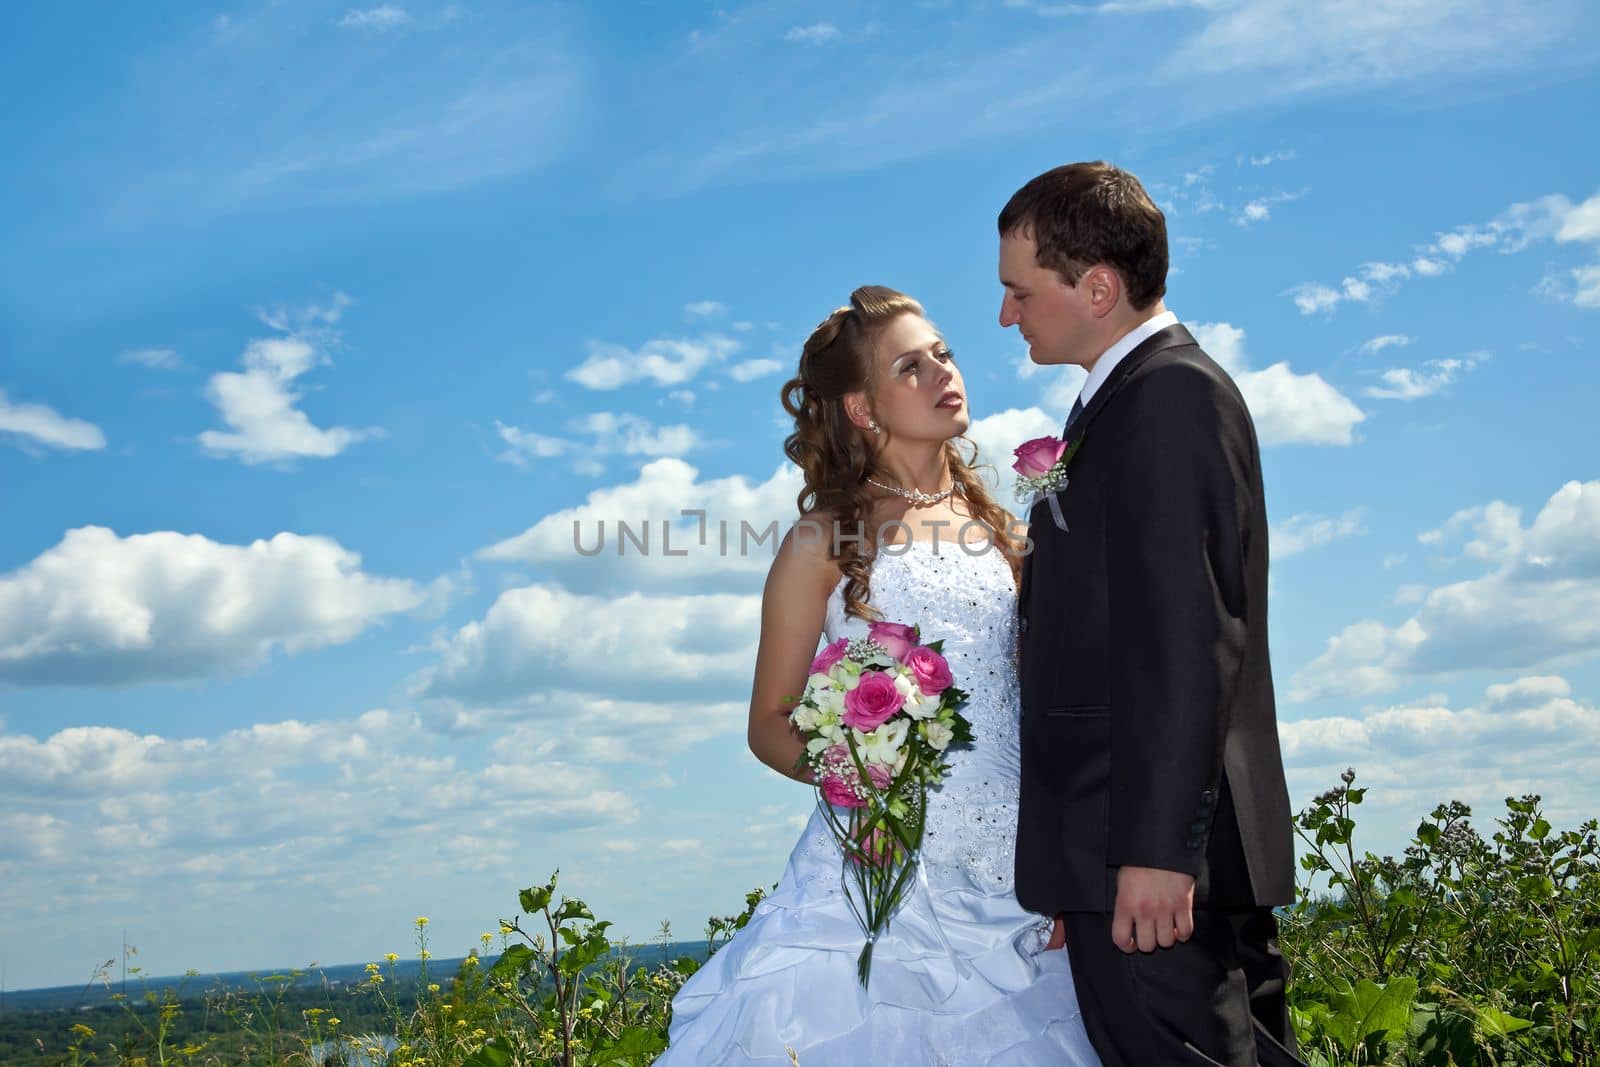 Wedding couple stand in grass in sunny summer day